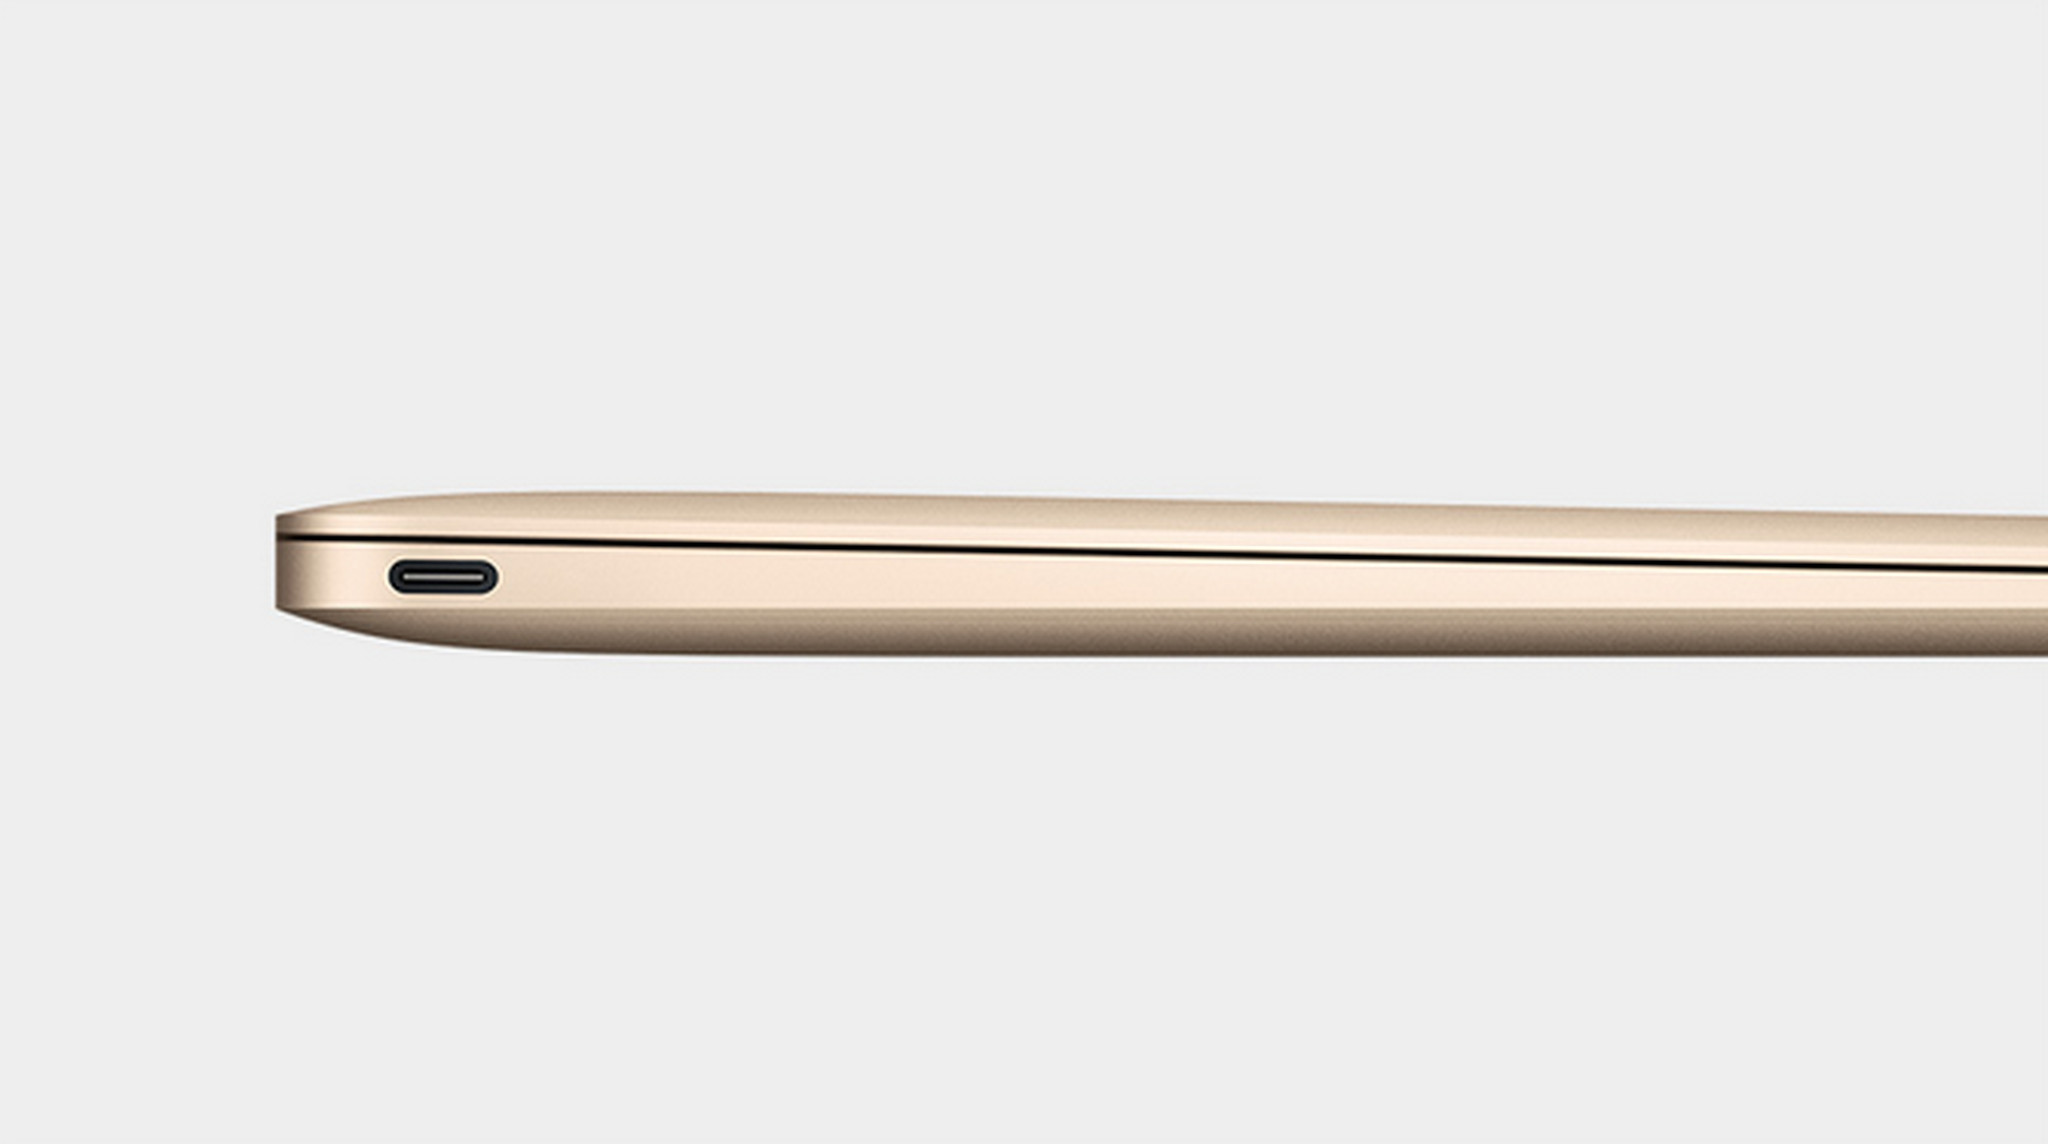 New MacBook announced with 12-inch Retina display, shipping April 10th ...